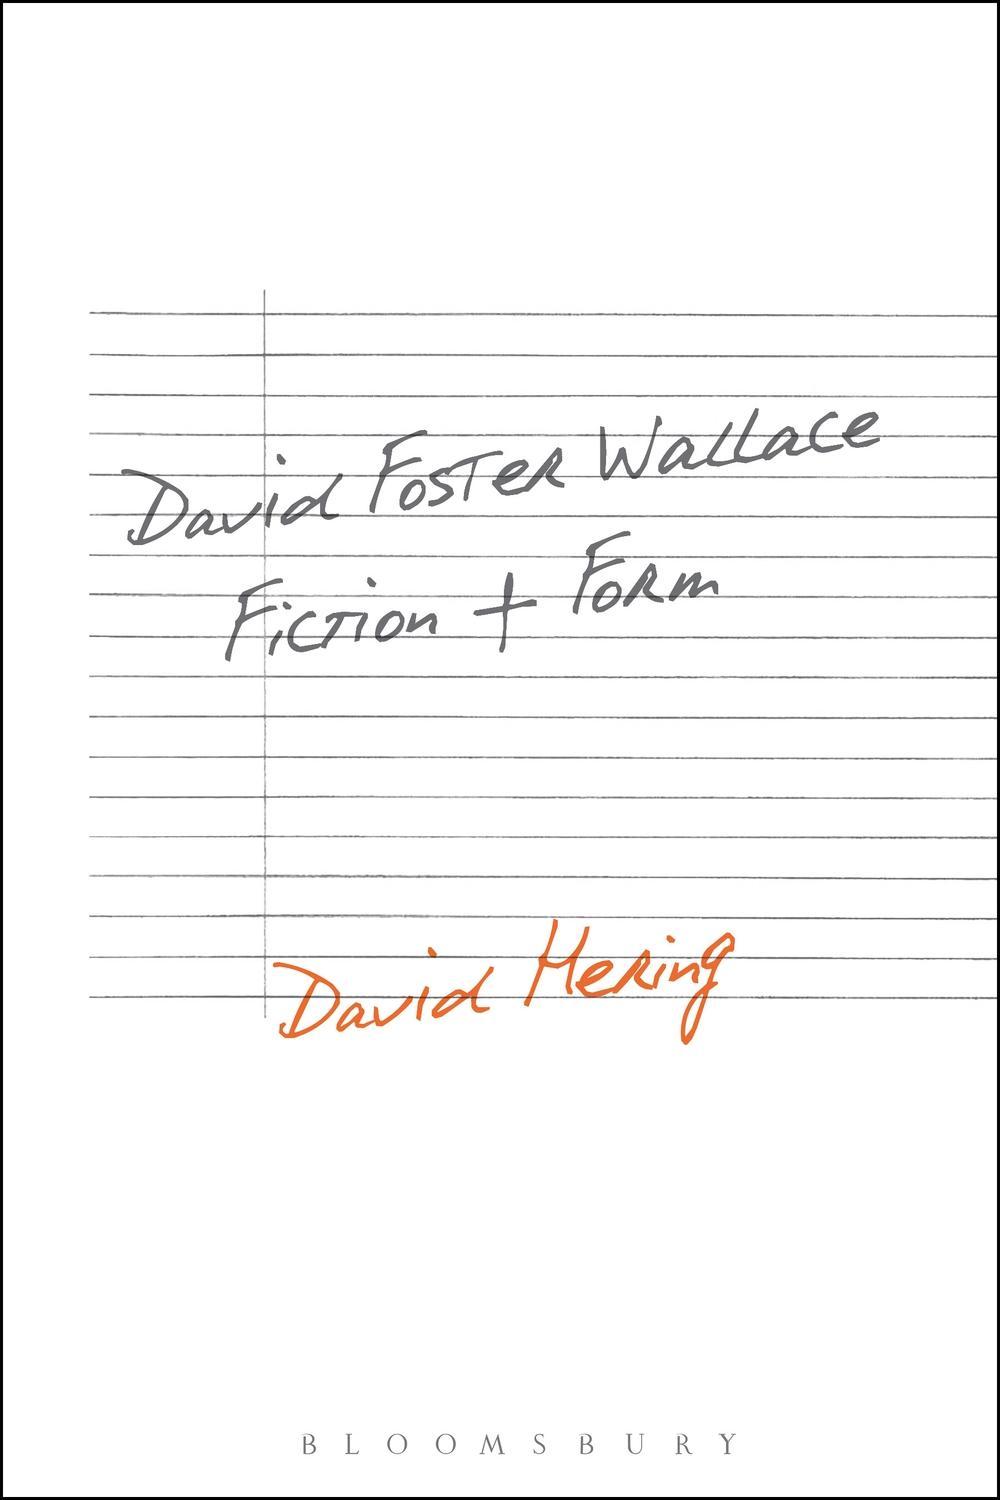 David Foster Wallace: Fiction and Form - David Hering